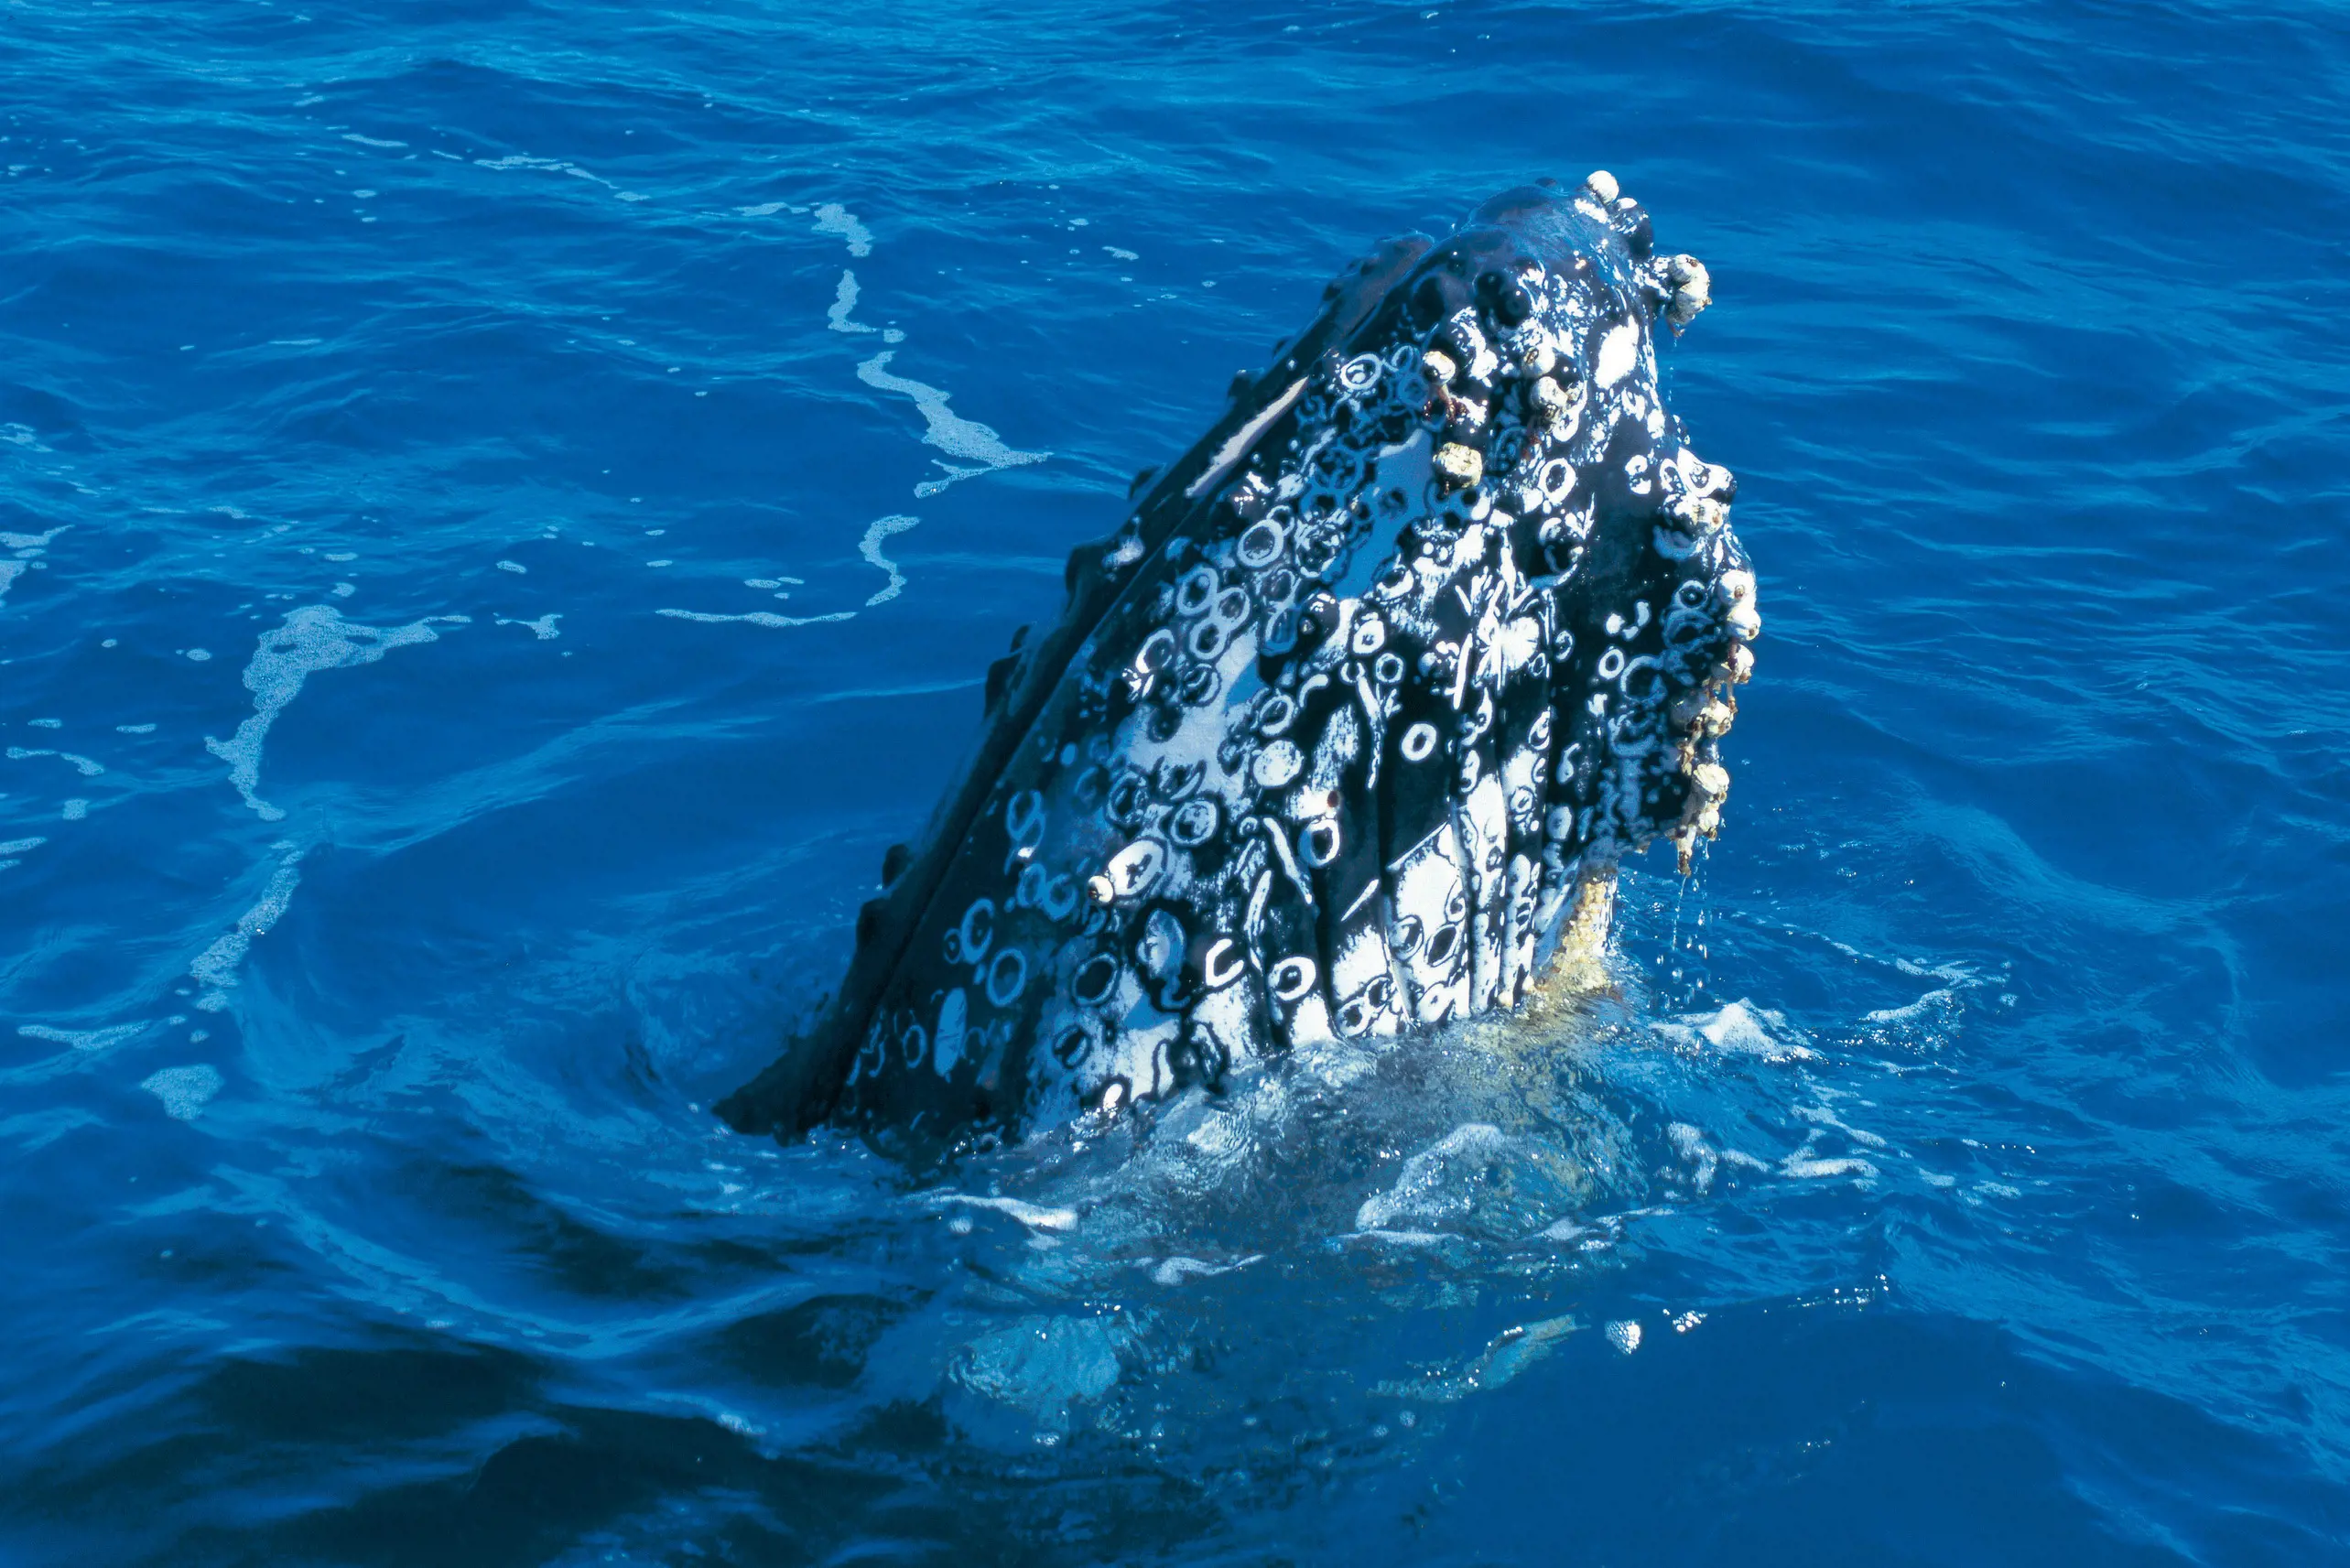 Humpback whale head breaching the water at Maria Island National Park.